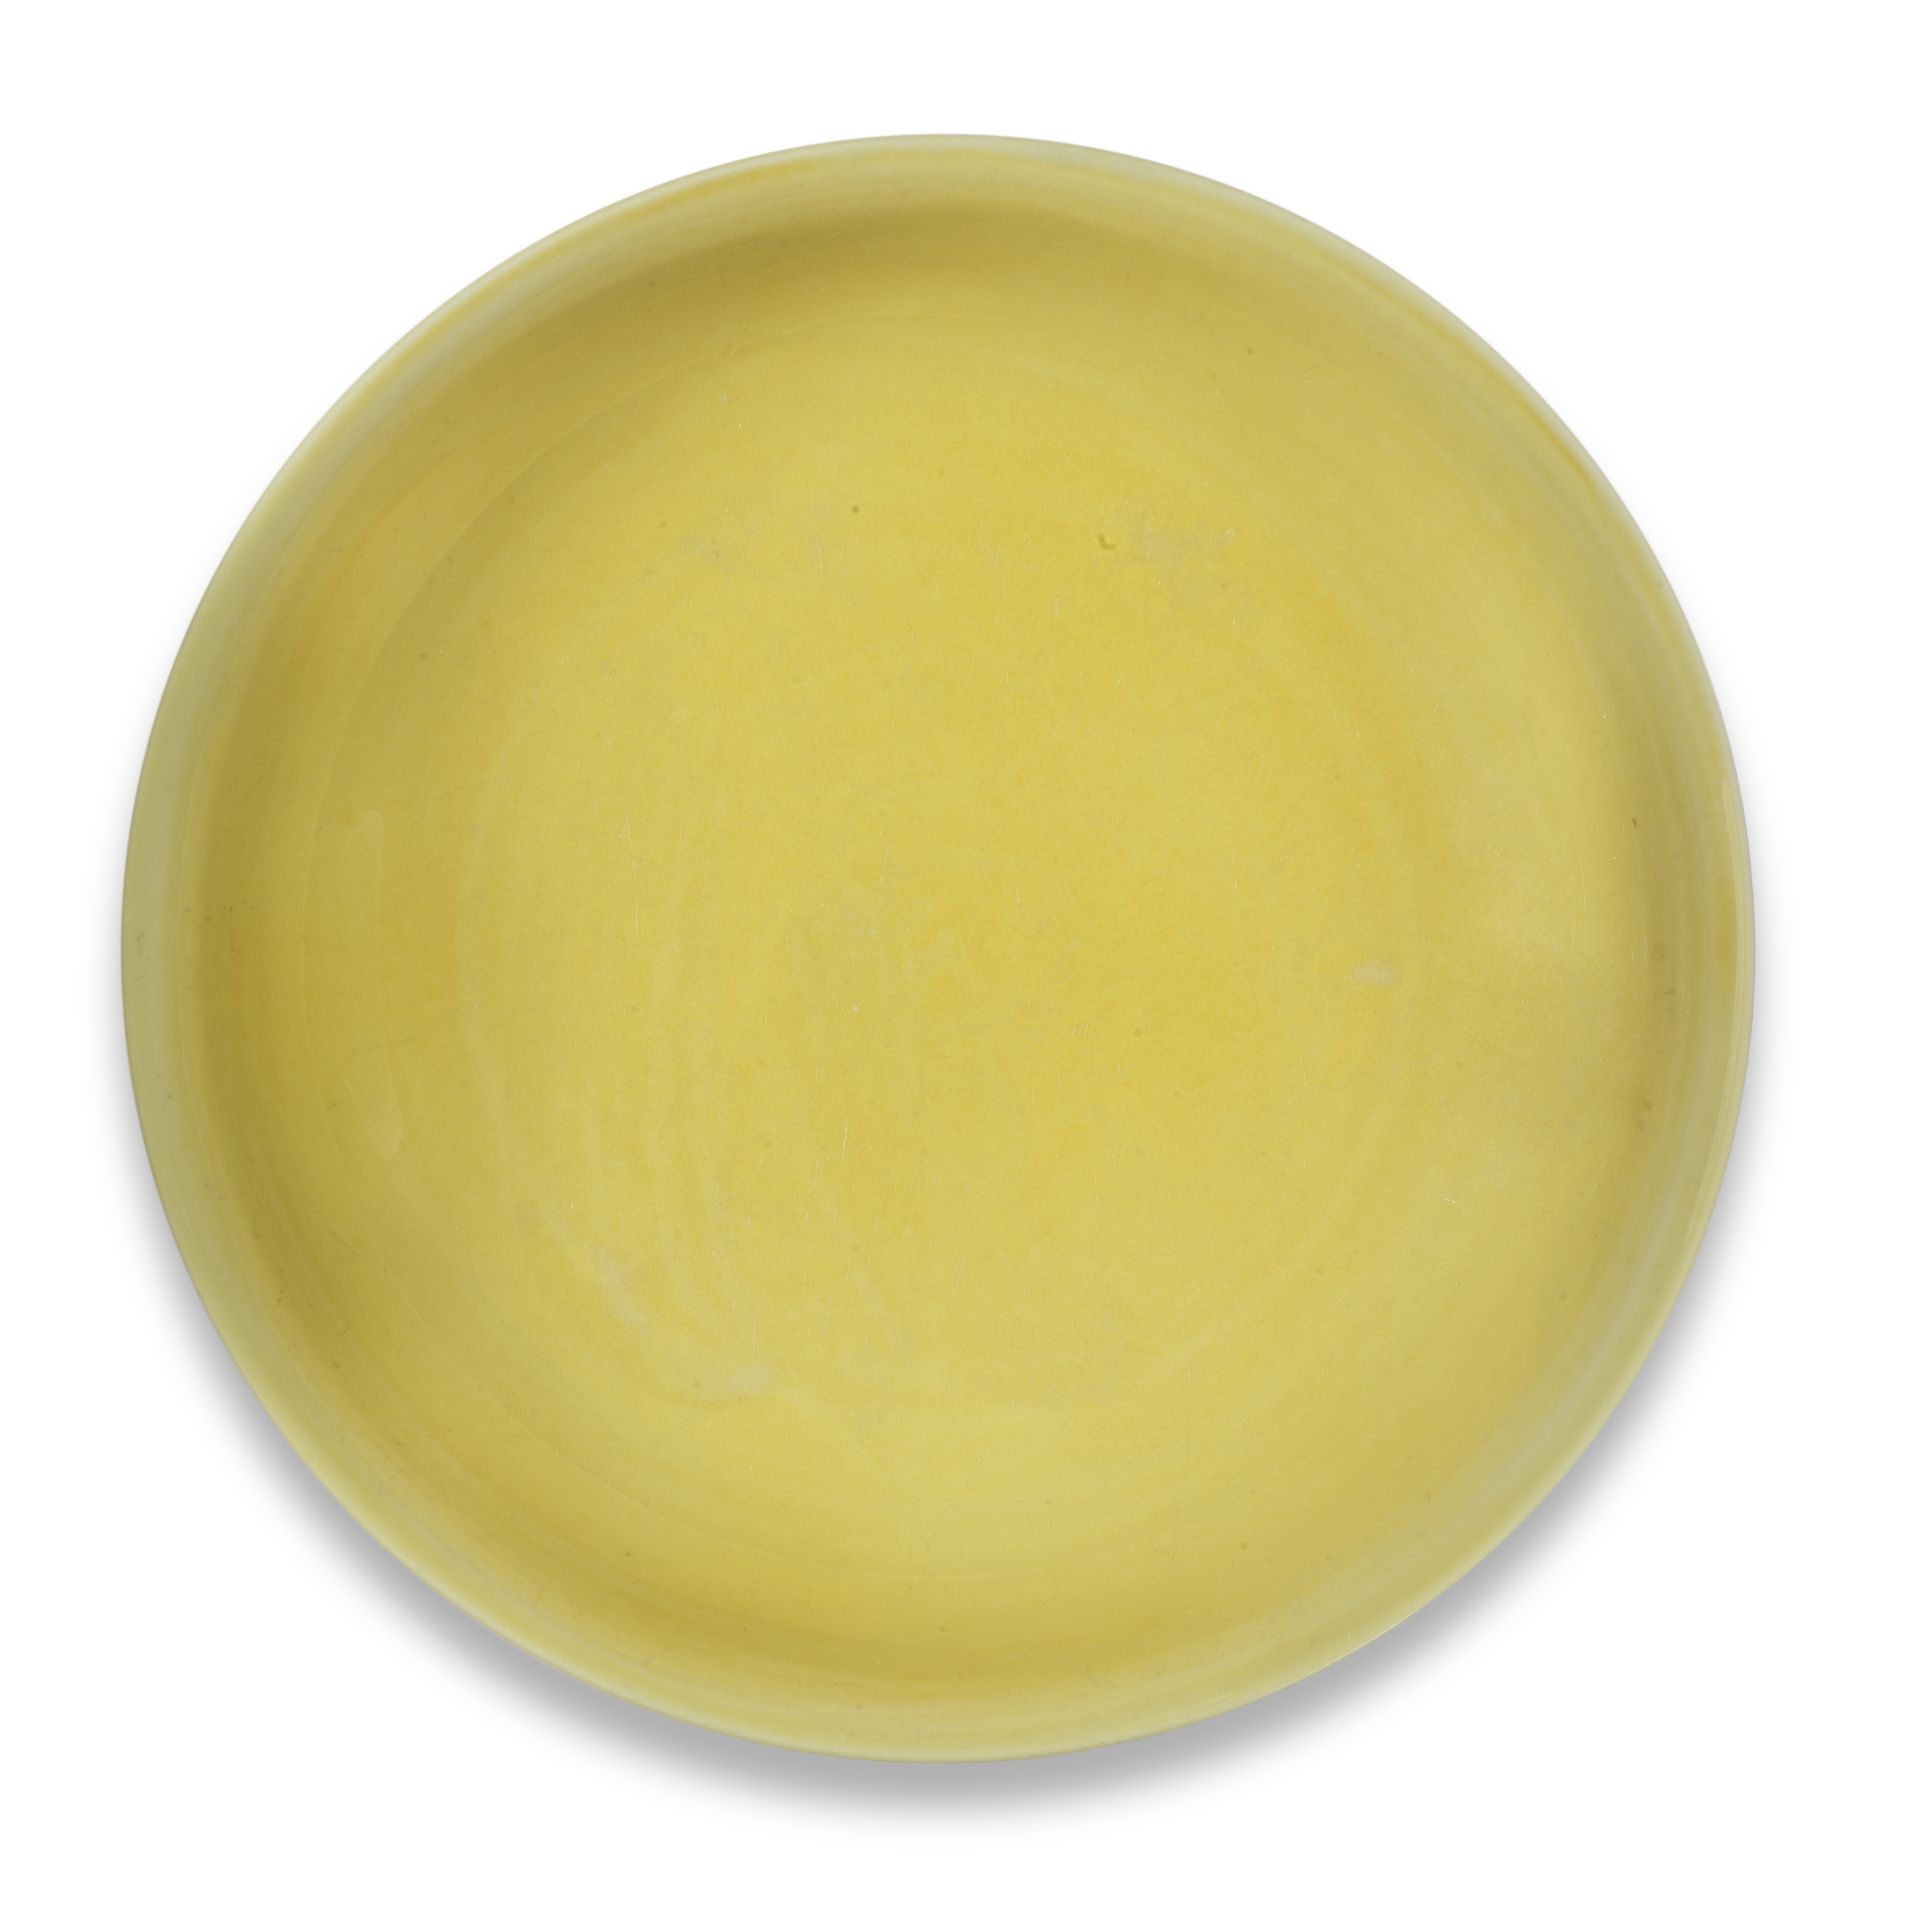 AN IMPERIAL YELLOW-GLAZED SAUCER-DISH Jiajing six-character mark and of the period